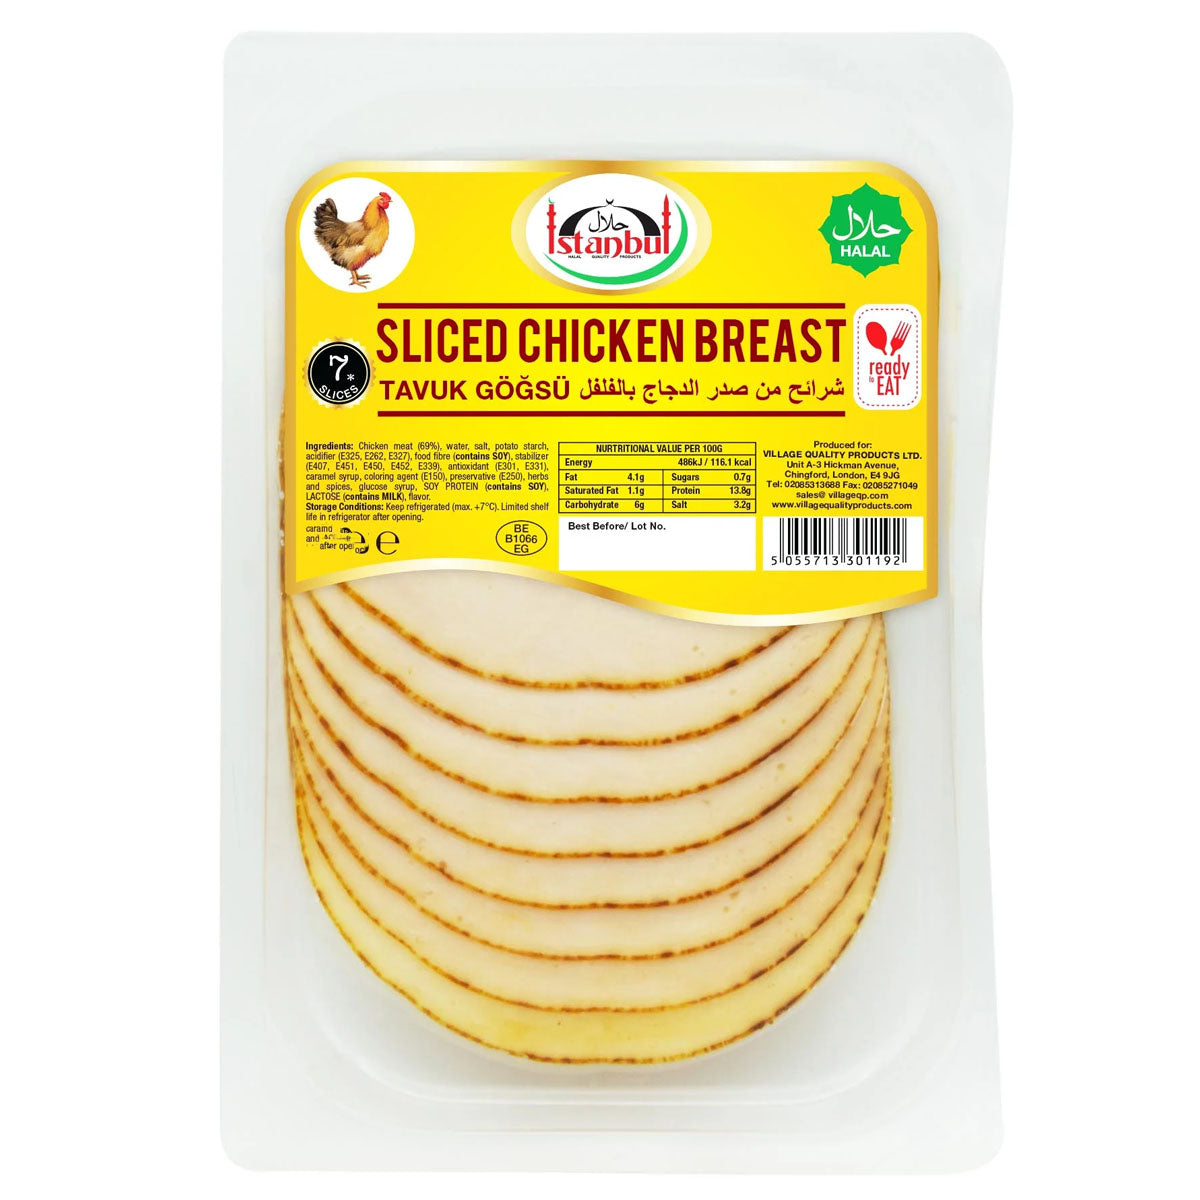 Istanbul - Sliced Chicken Breast (Halal) - 130g on a white background.